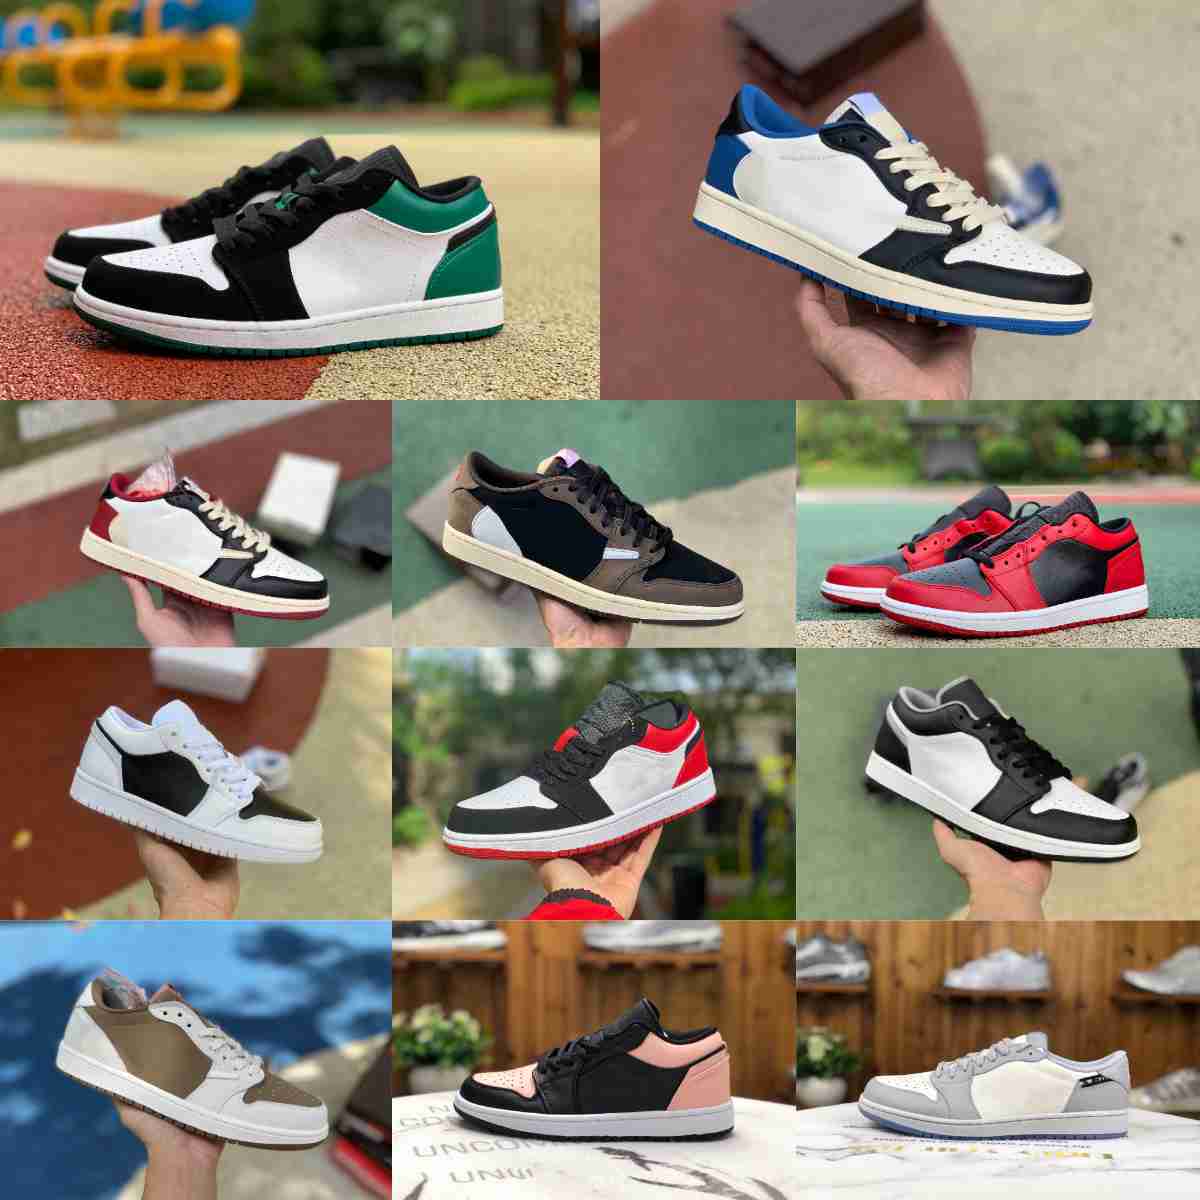 

2023 Fragment TS Jumpman X 1 1S Low Court Purple Black Shadow Panda Emerald Crimson Basketball Shoes White Brown Red Gold Grey Toe UNC Tint Designer Sports Sneakers S68, Please contact us